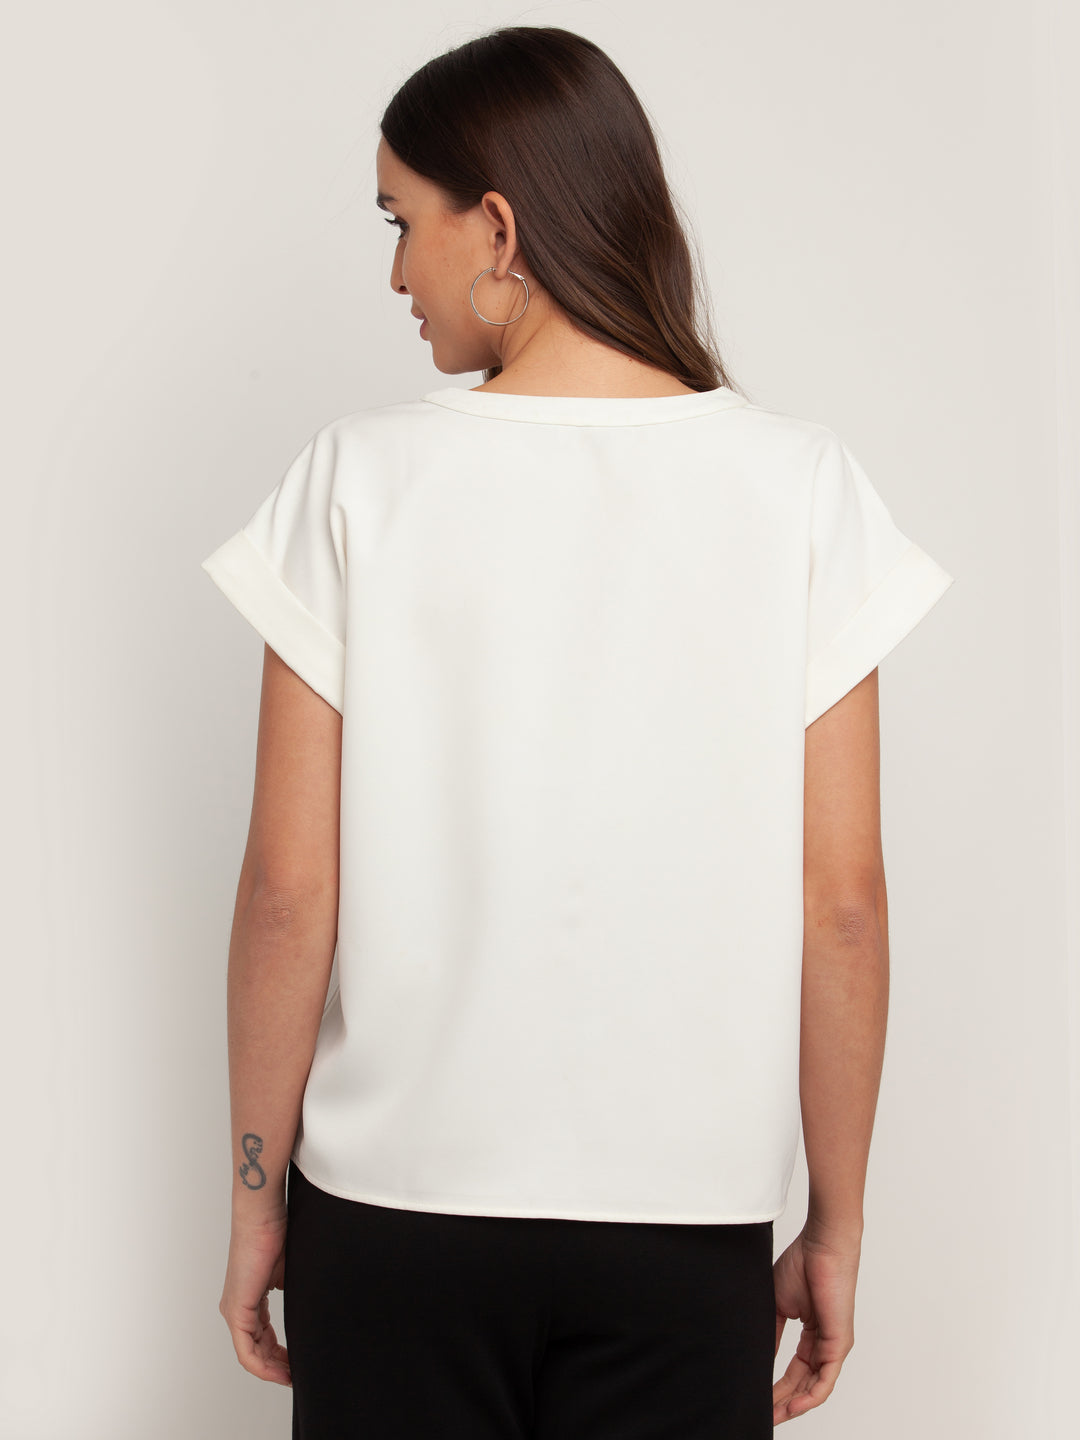 White Solid Shirt For Women